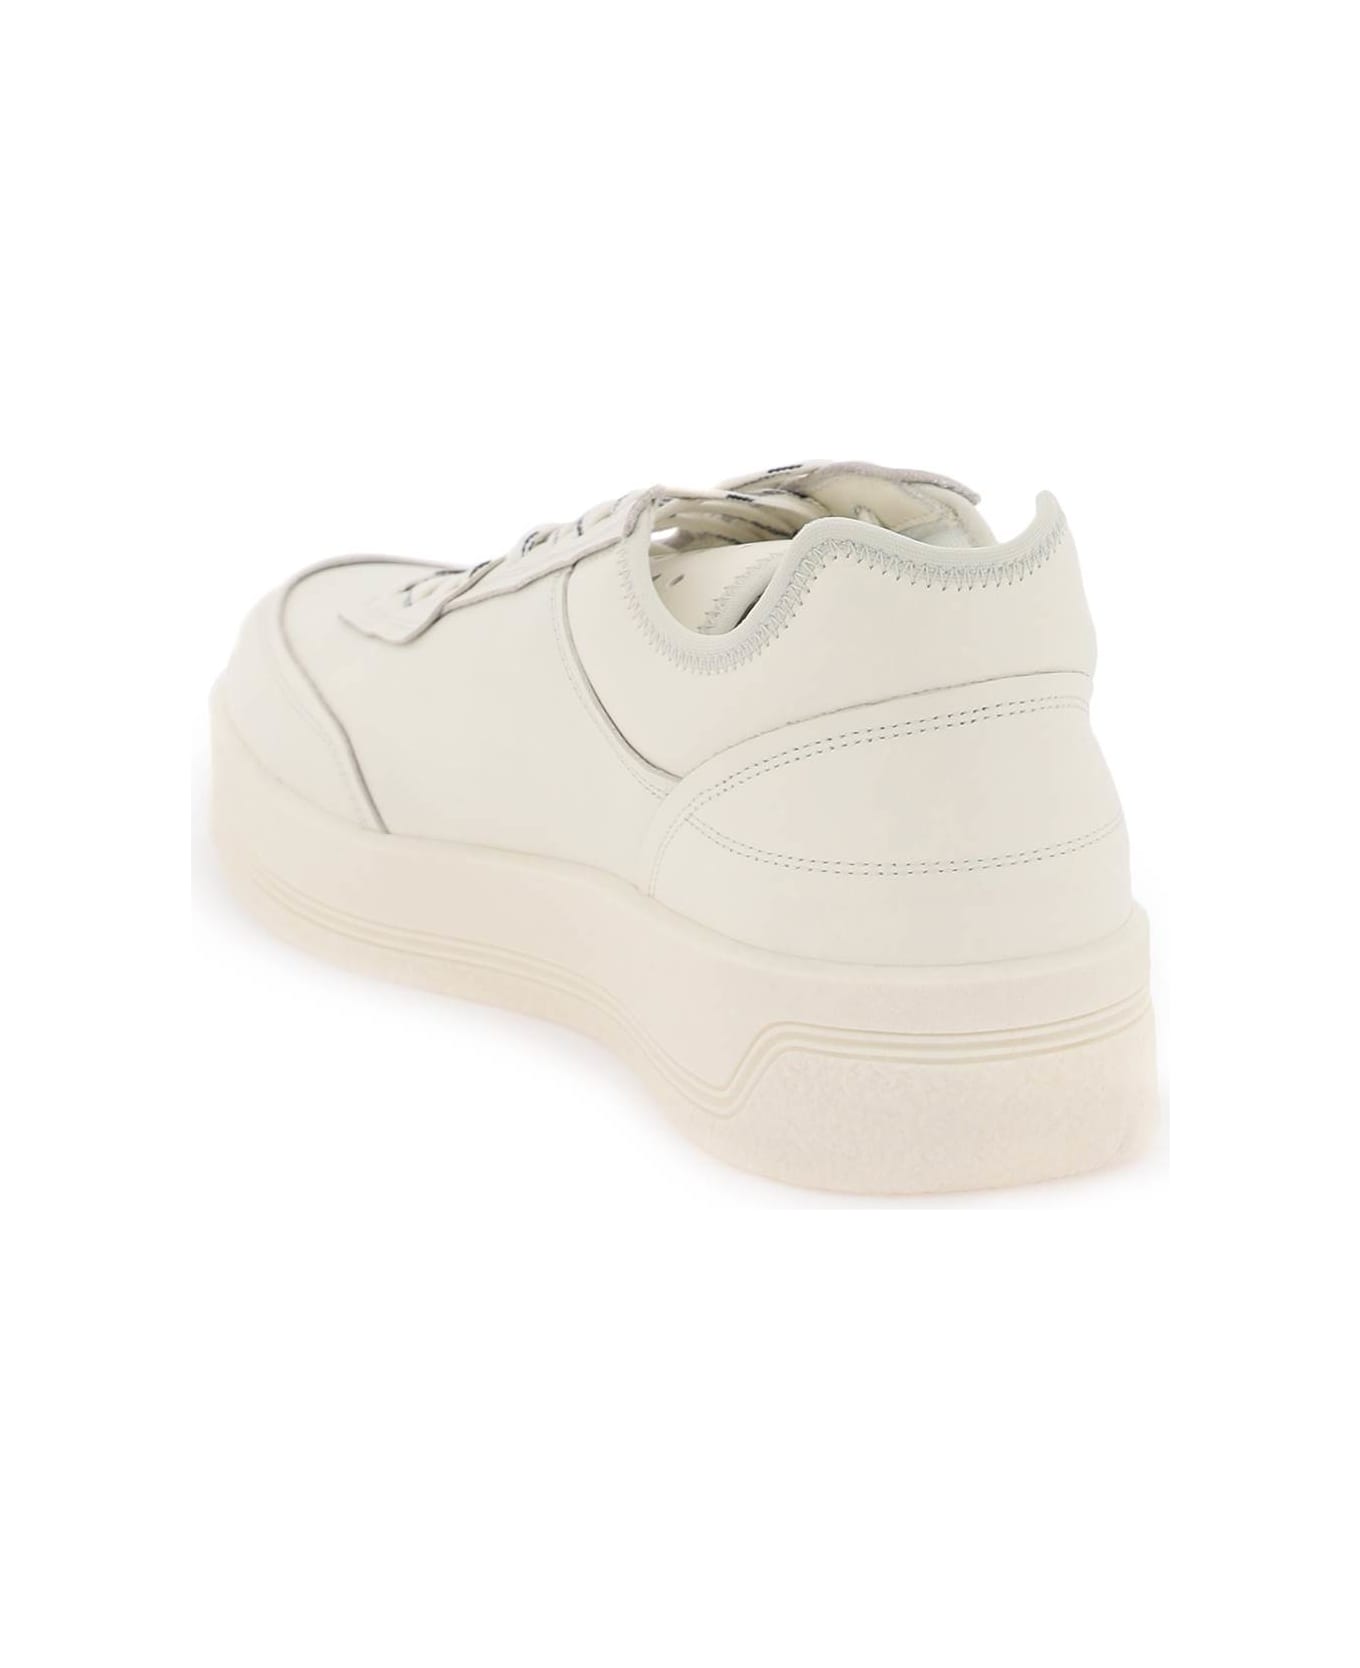 OAMC 'cosmos Cupsole' Sneakers - Bianco